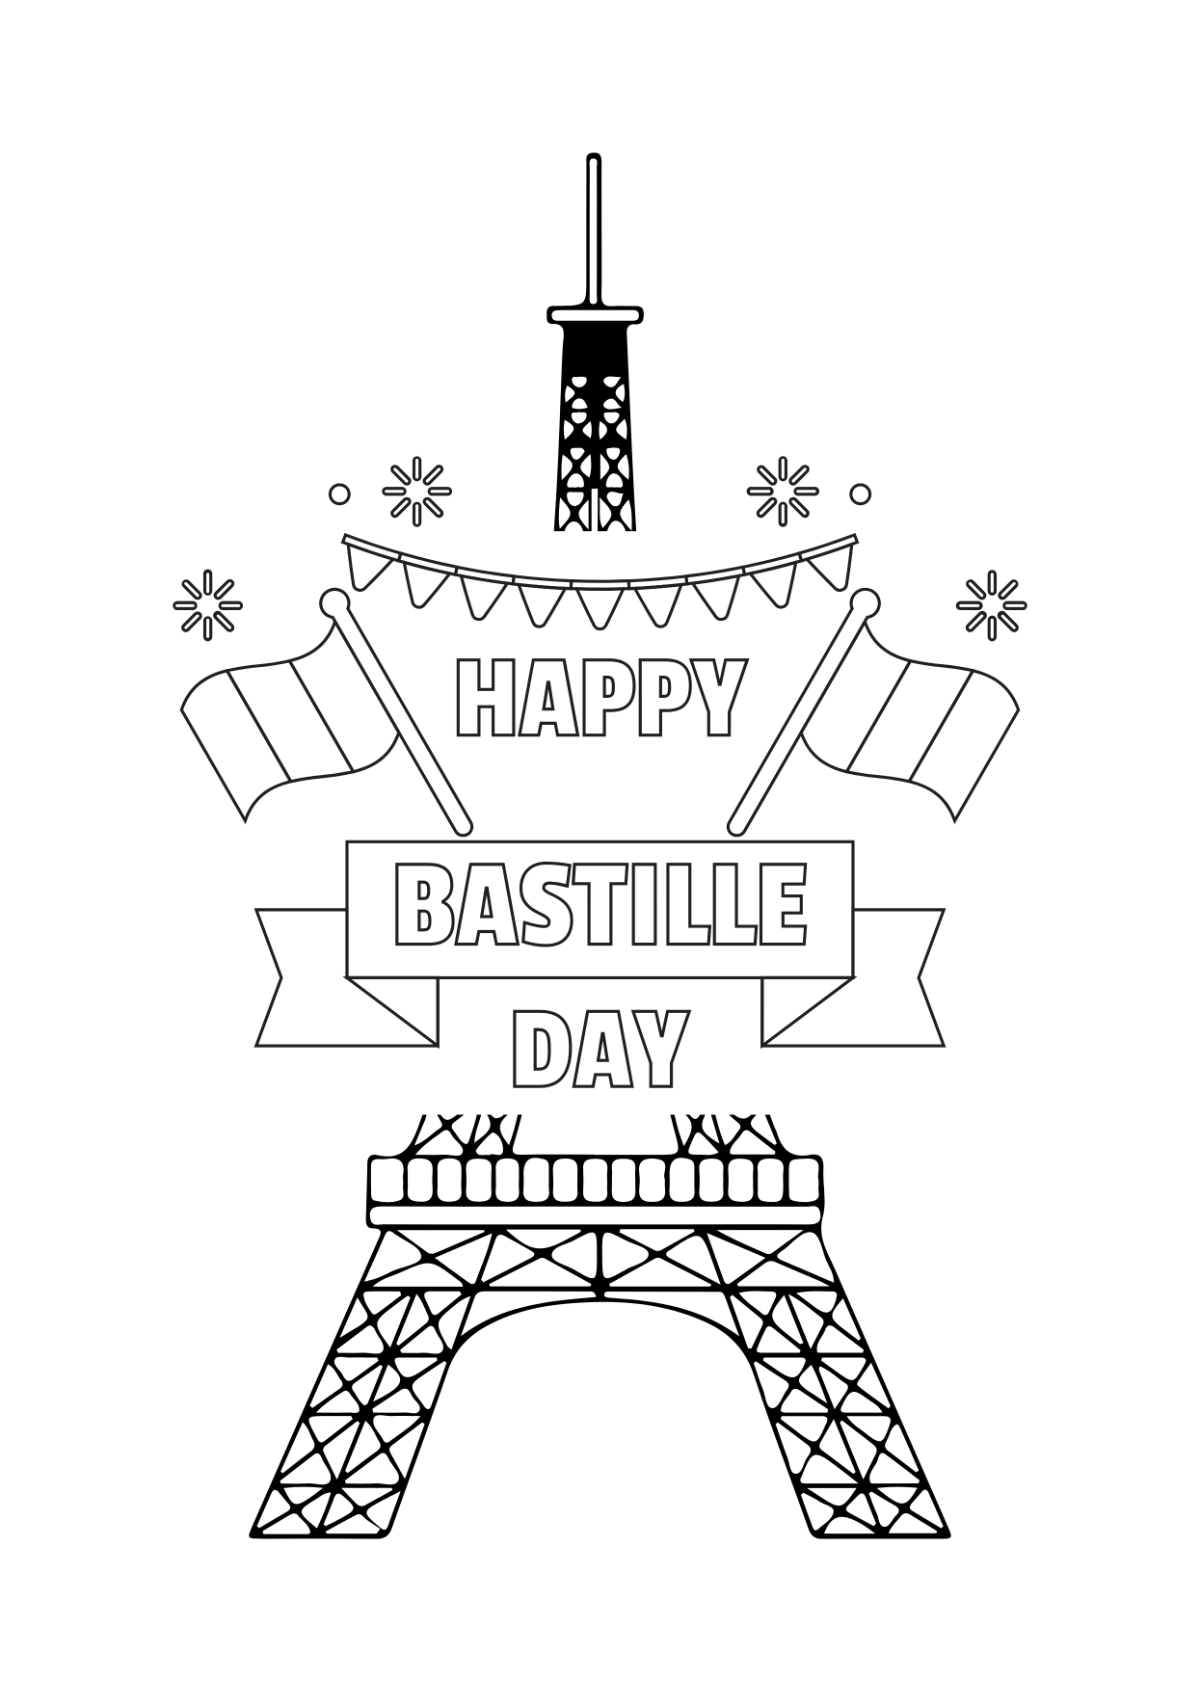 Bastille Day Drawing